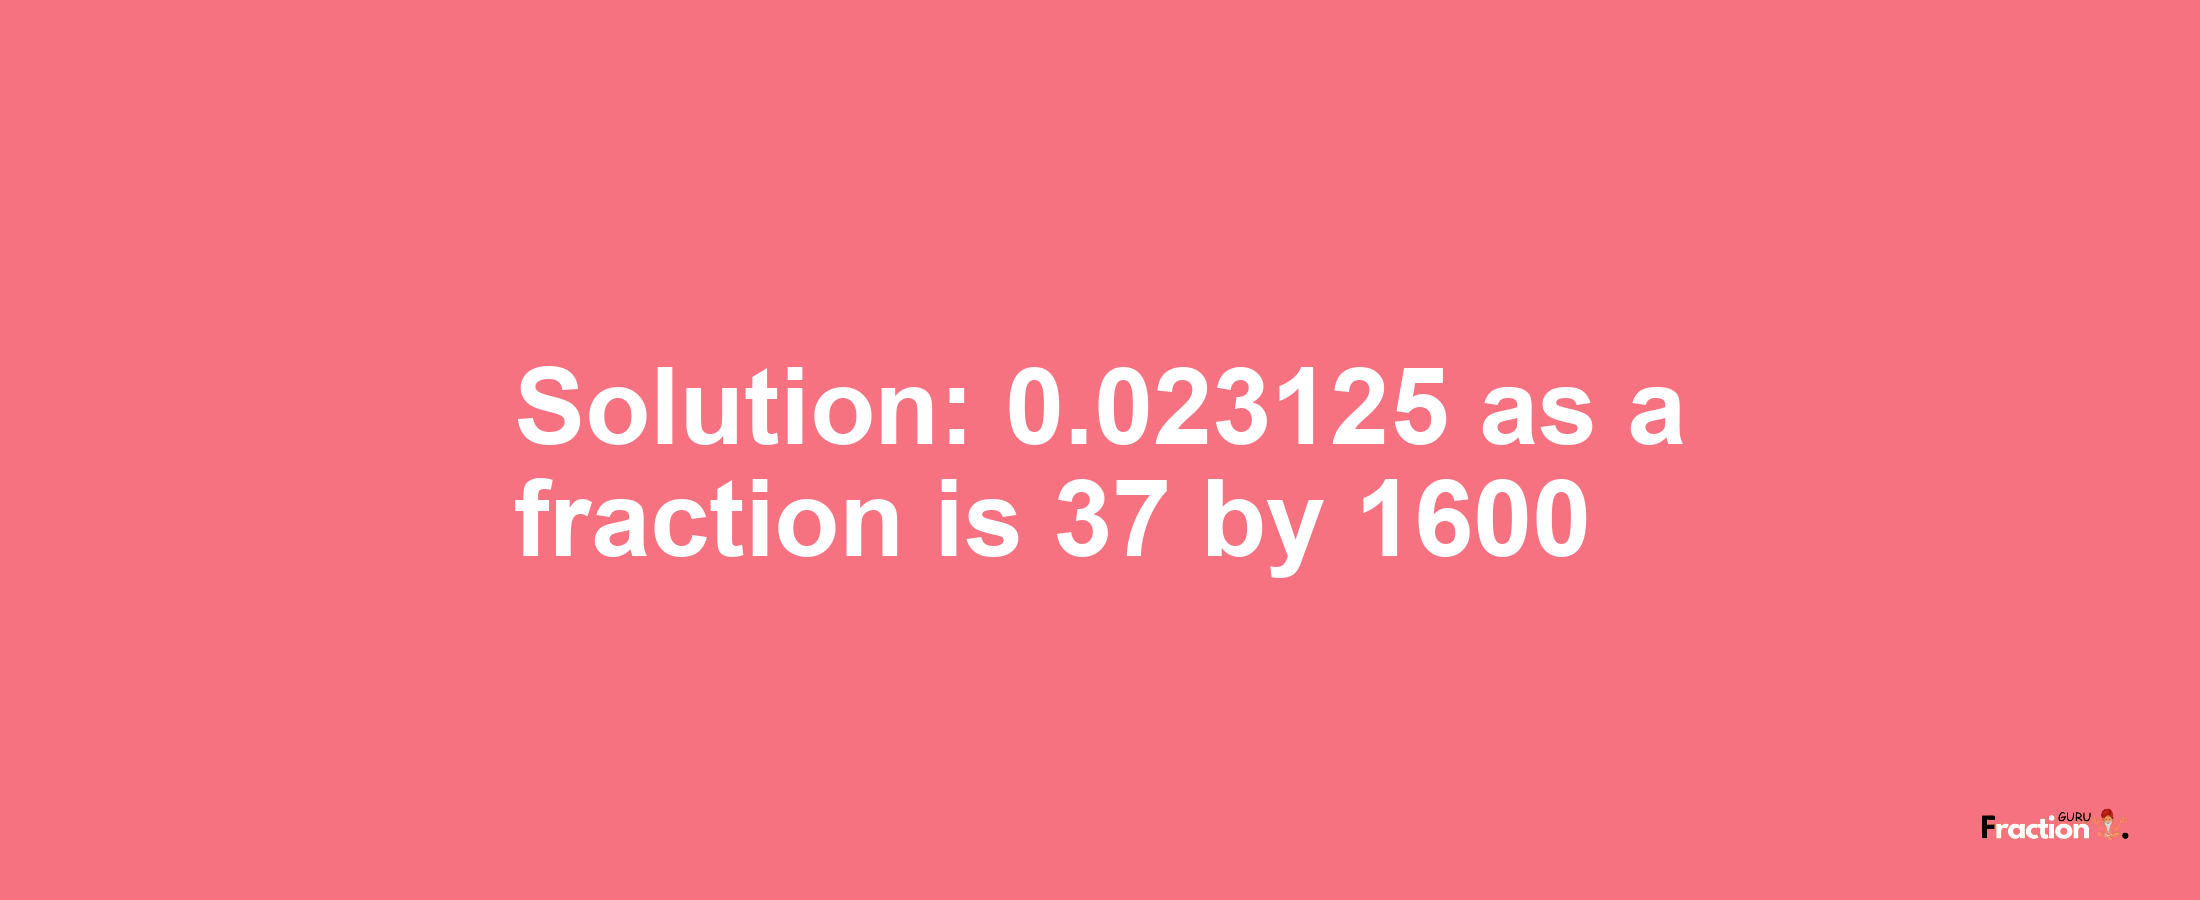 Solution:0.023125 as a fraction is 37/1600